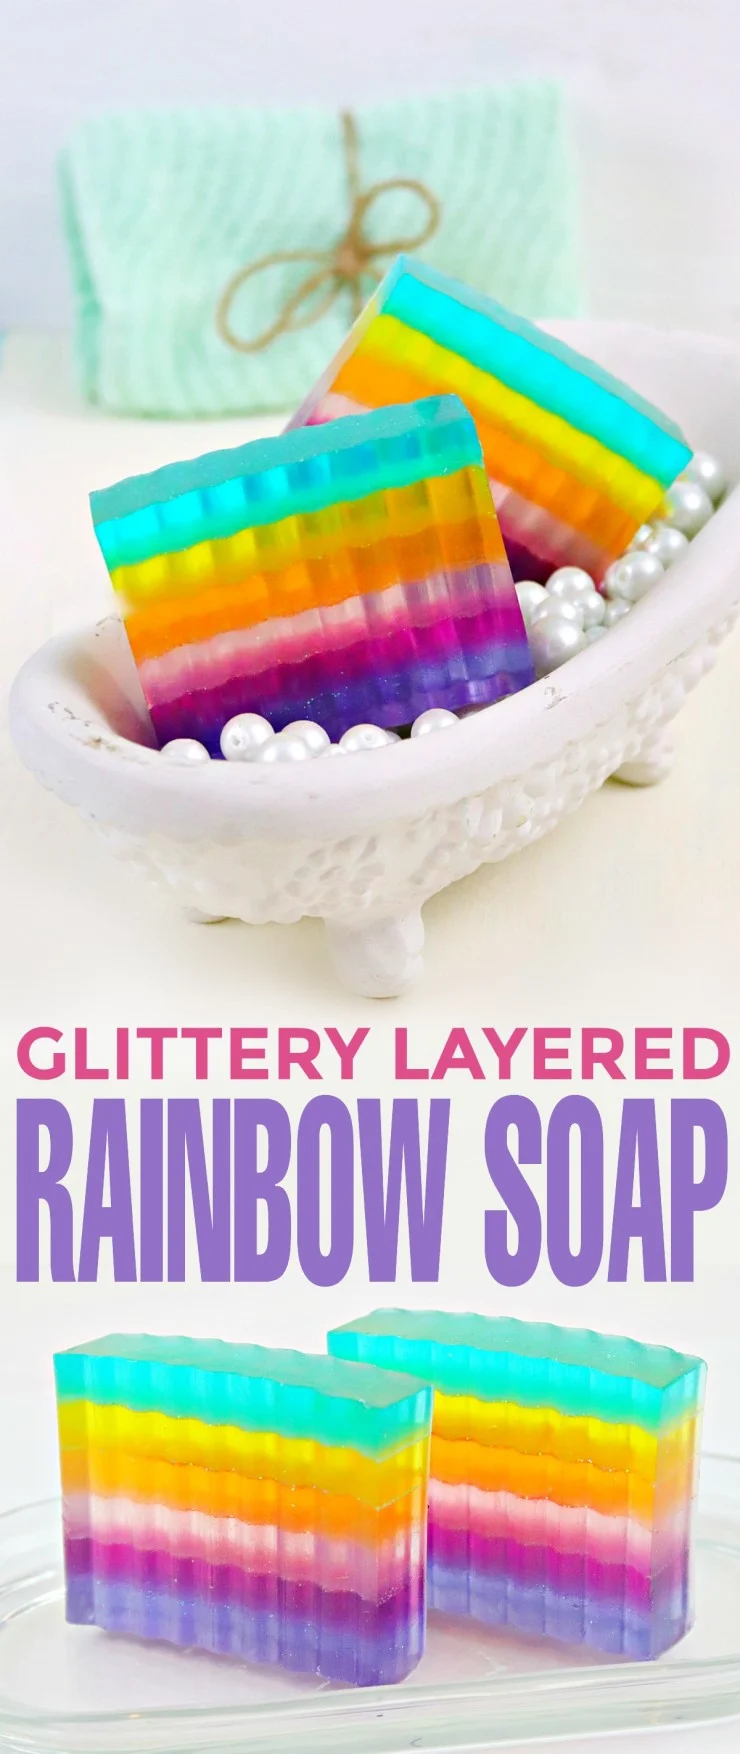 This apple scented DIY Glittery Layered Rainbow Soap is so pretty and perfect. Use at home or give as gifts, this soap is sure to leave you with joy!